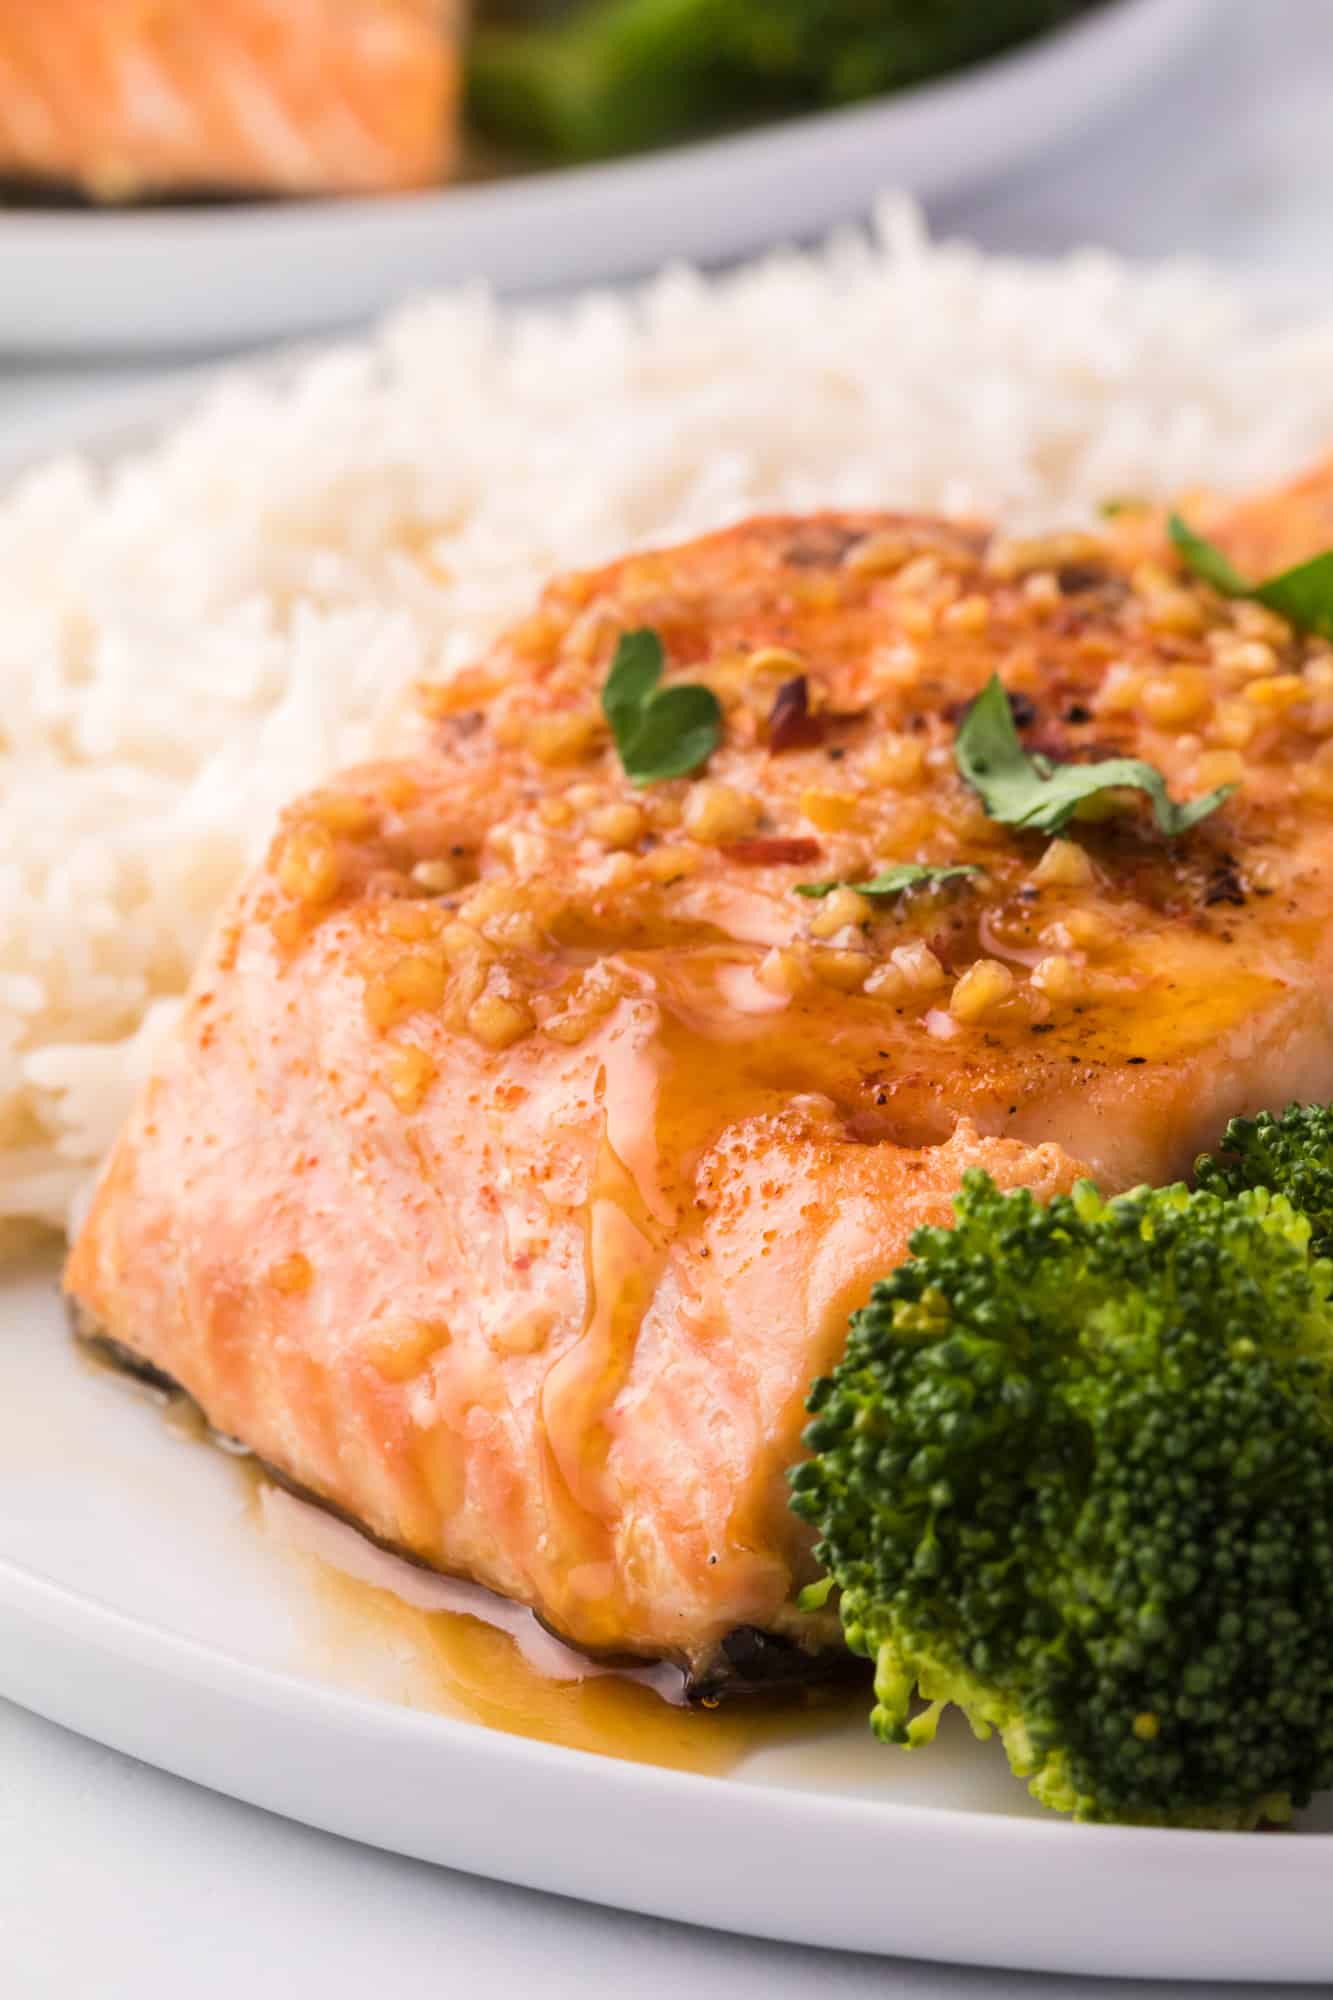 Honey garlic salmon on a plate with rice and broccoli.